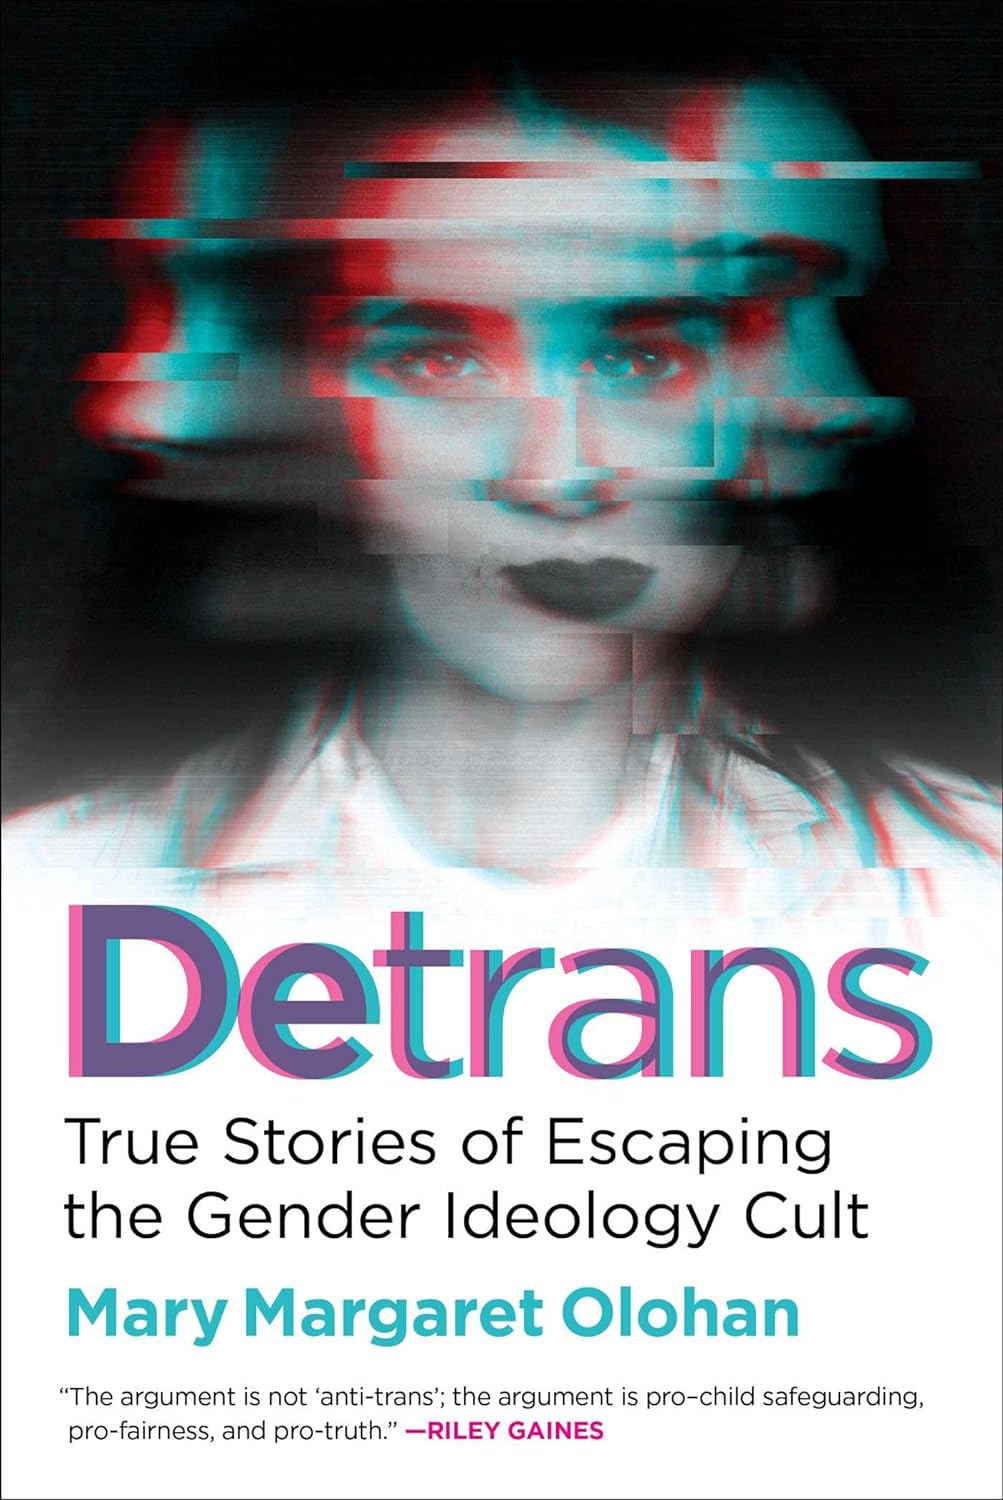 Cover of 'Detrans' by Mary Margaret Olohan. (Skyhorse Publishing)